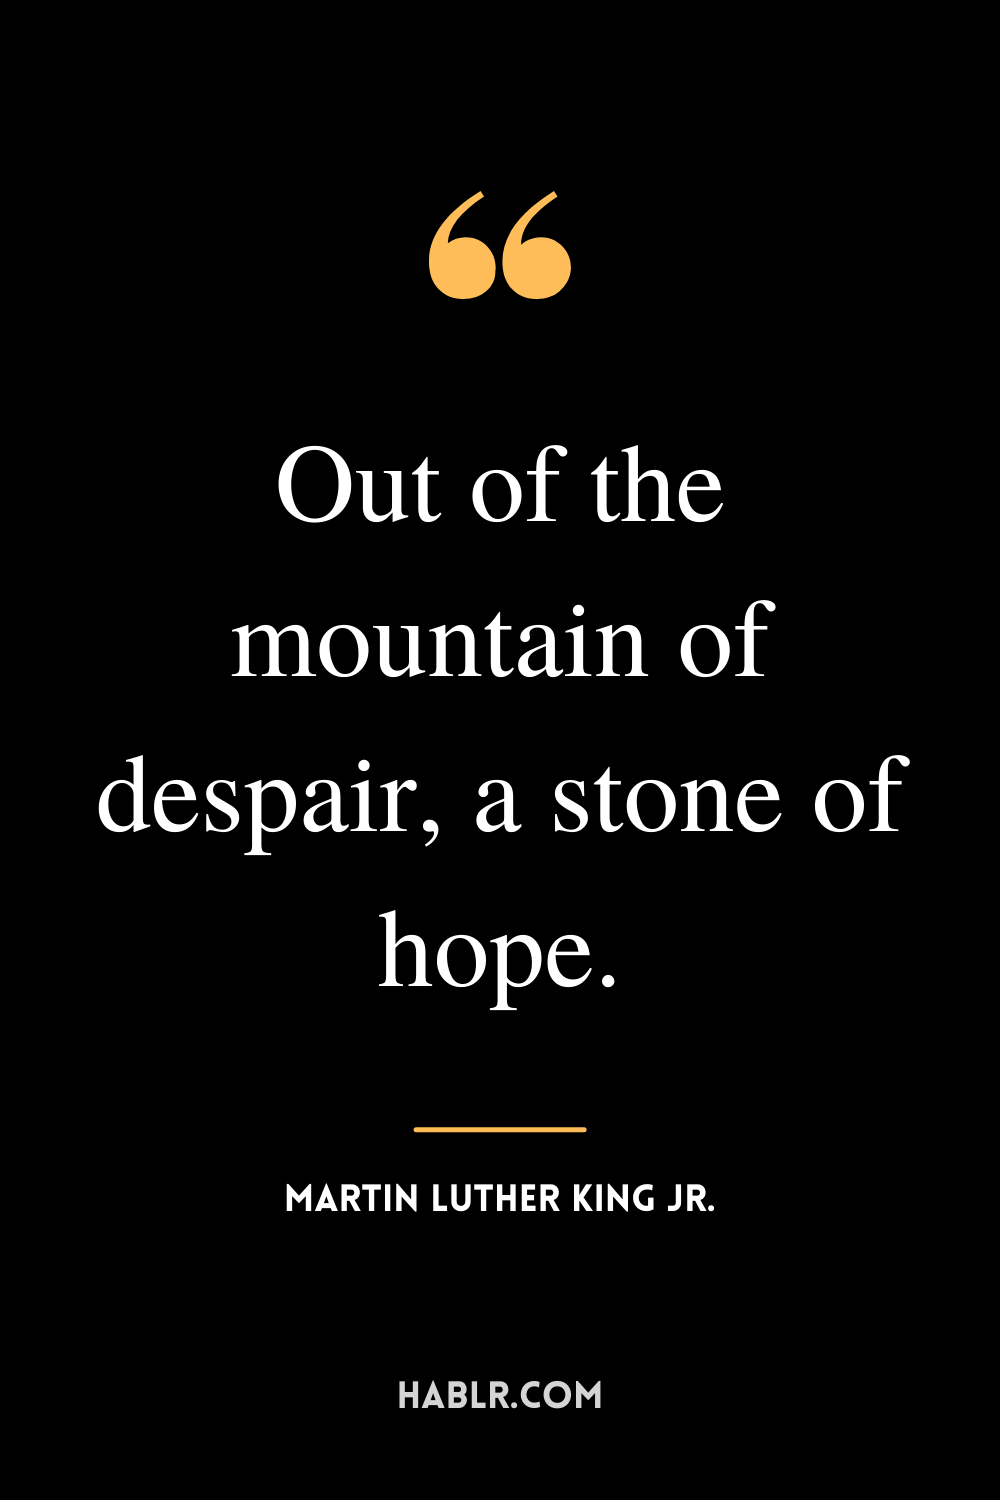  “Out of the mountain of despair, a stone of hope.” -Martin Luther King Jr.